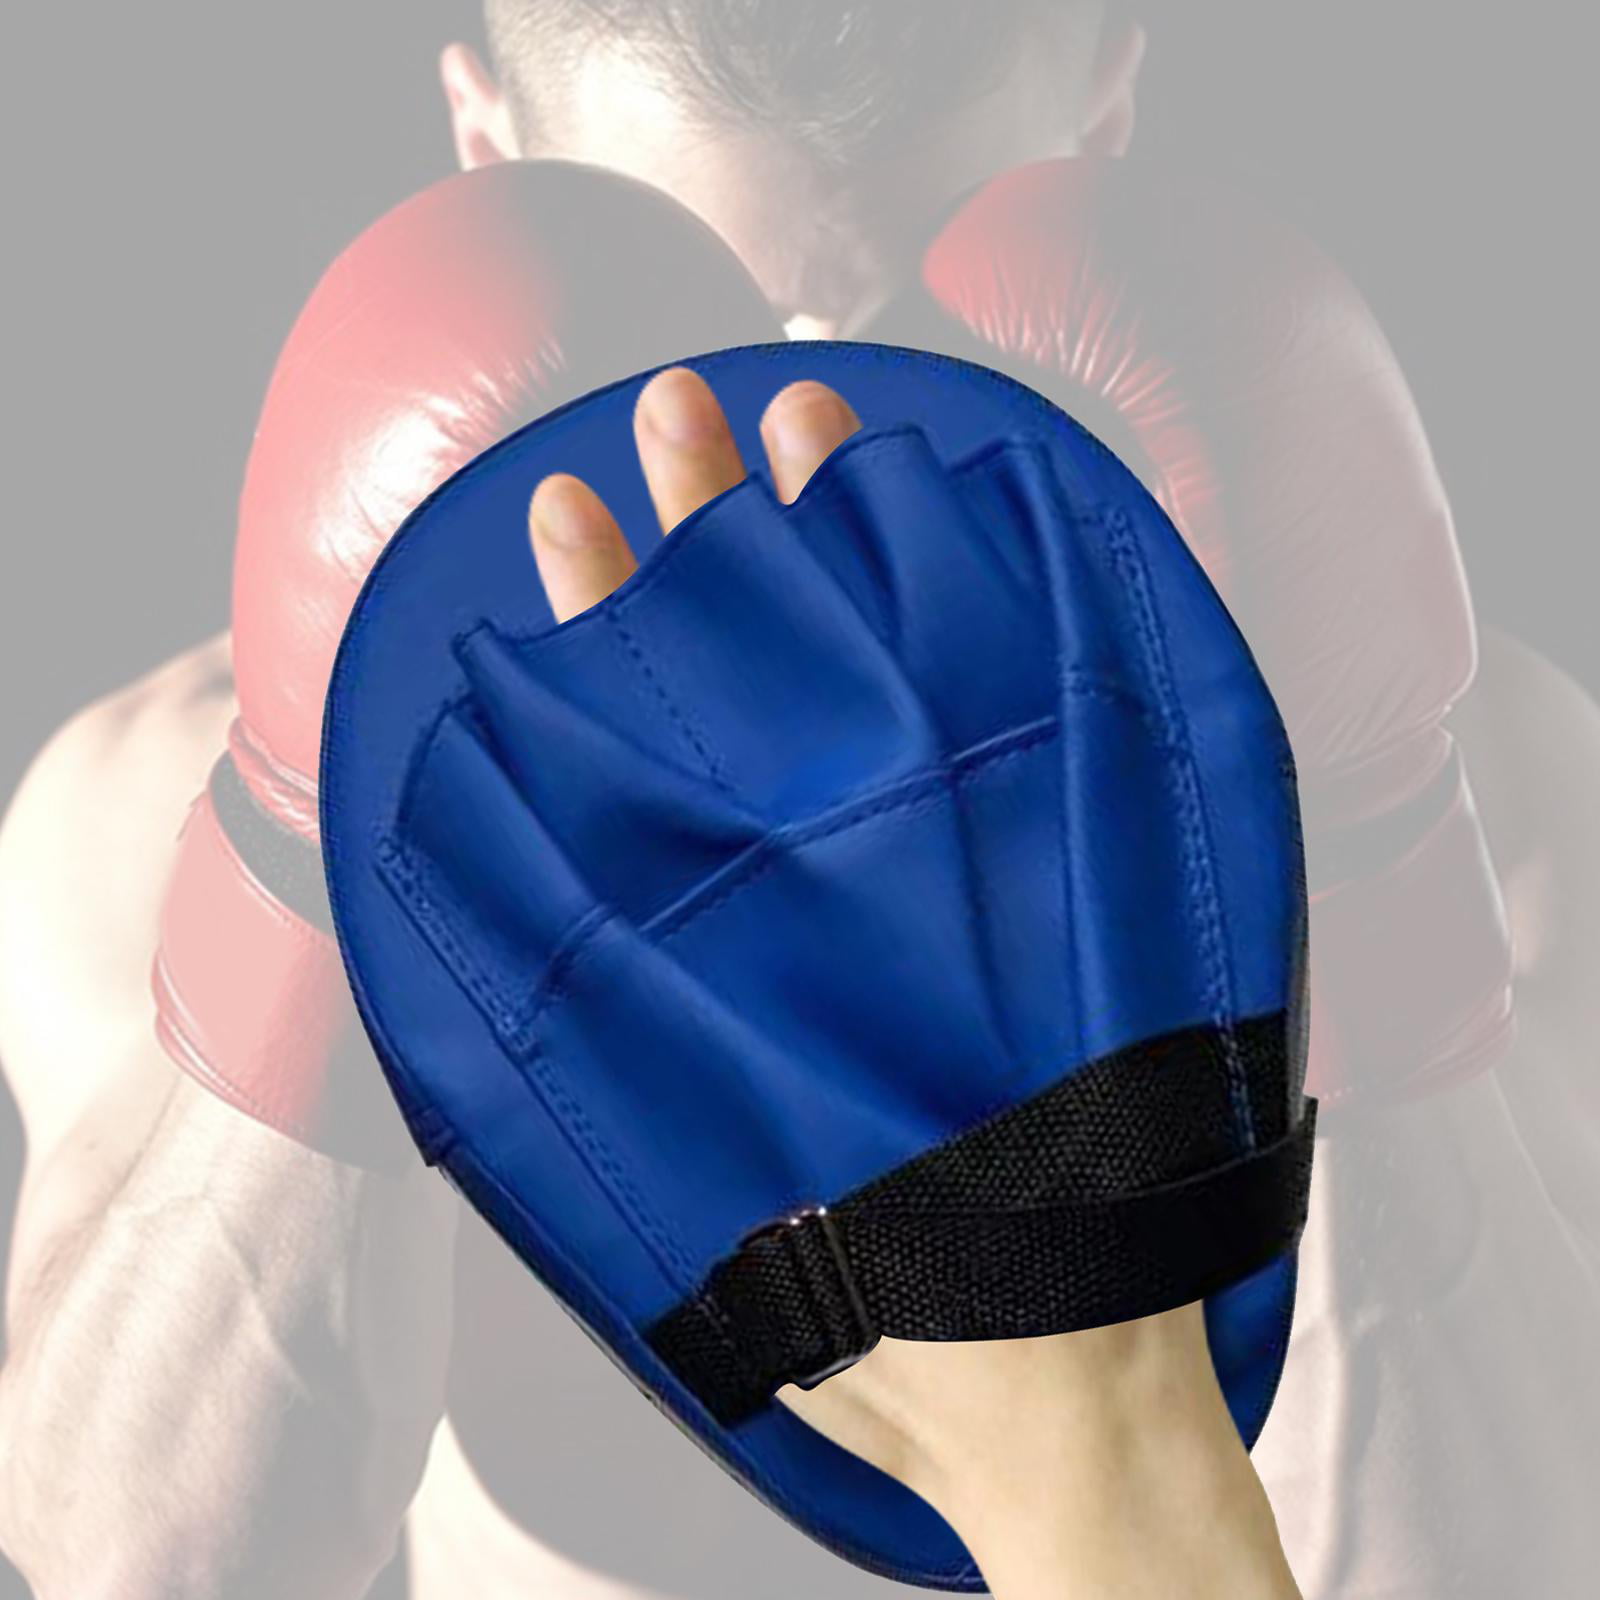 Boxing Focus Mitts Training Punch MMA Boxing Strike Curved pad Kick Muay Thai 